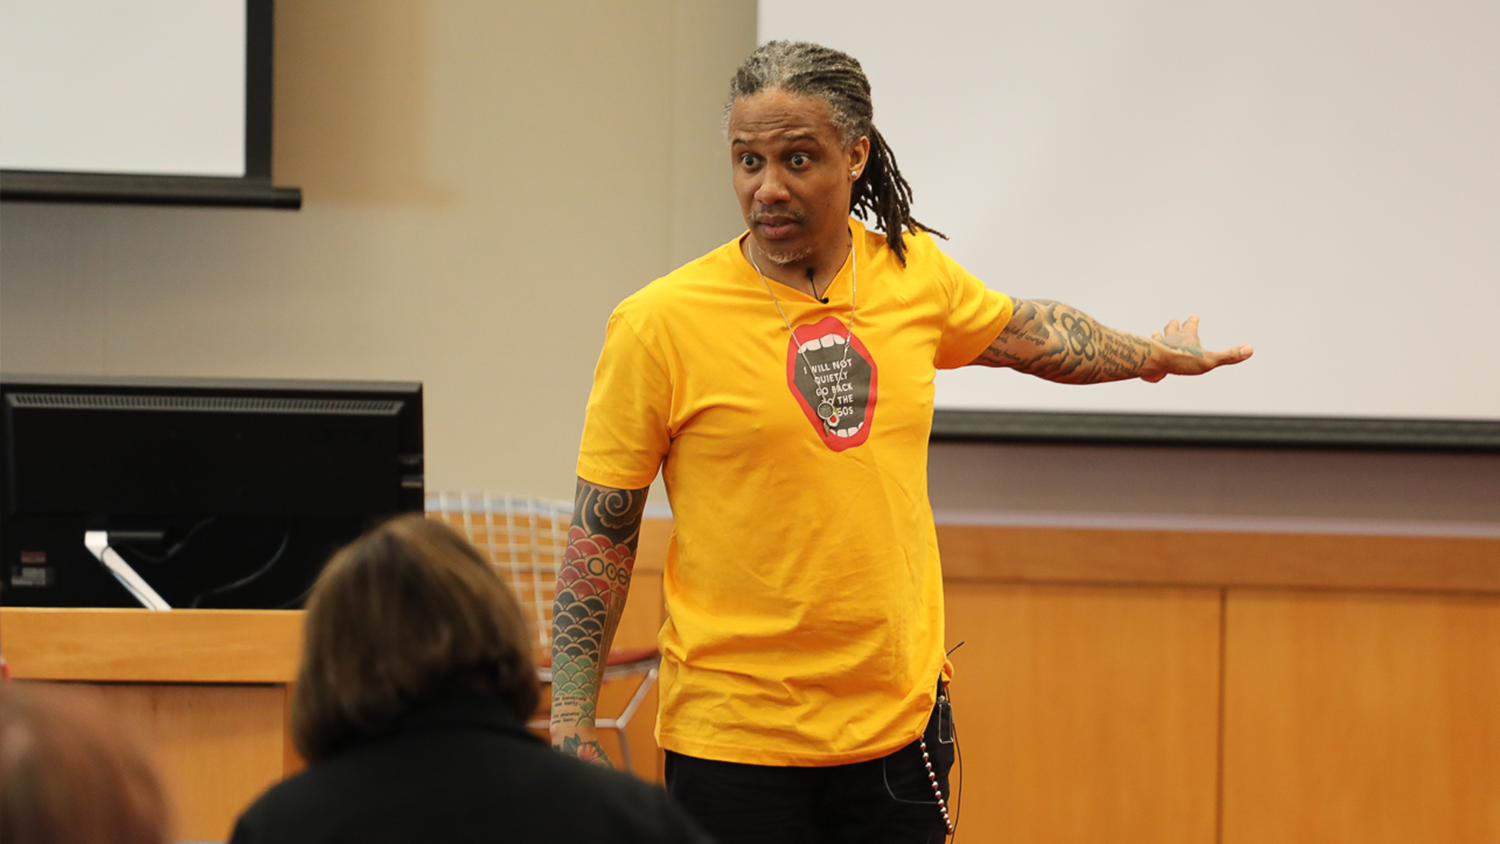 David Stovall speaking at the Friday Institute during the 4th annual Don C. Locke Symposium